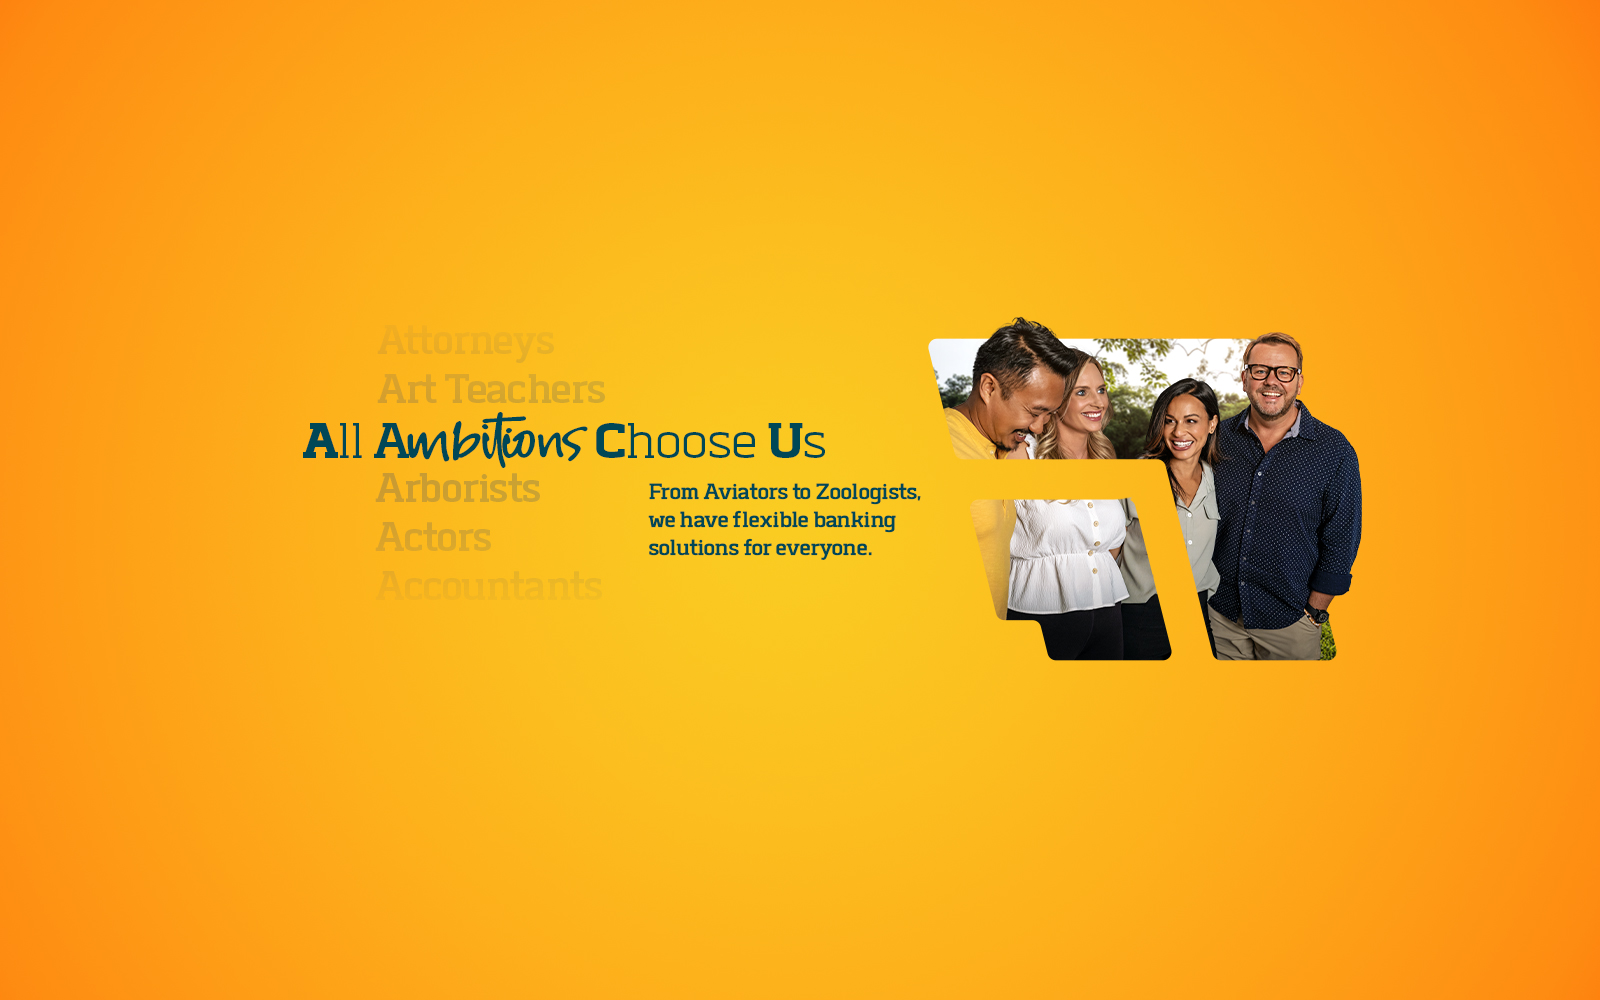 All ambitions choose us. From aviators to zoologists, we have flexible banking for everyone.